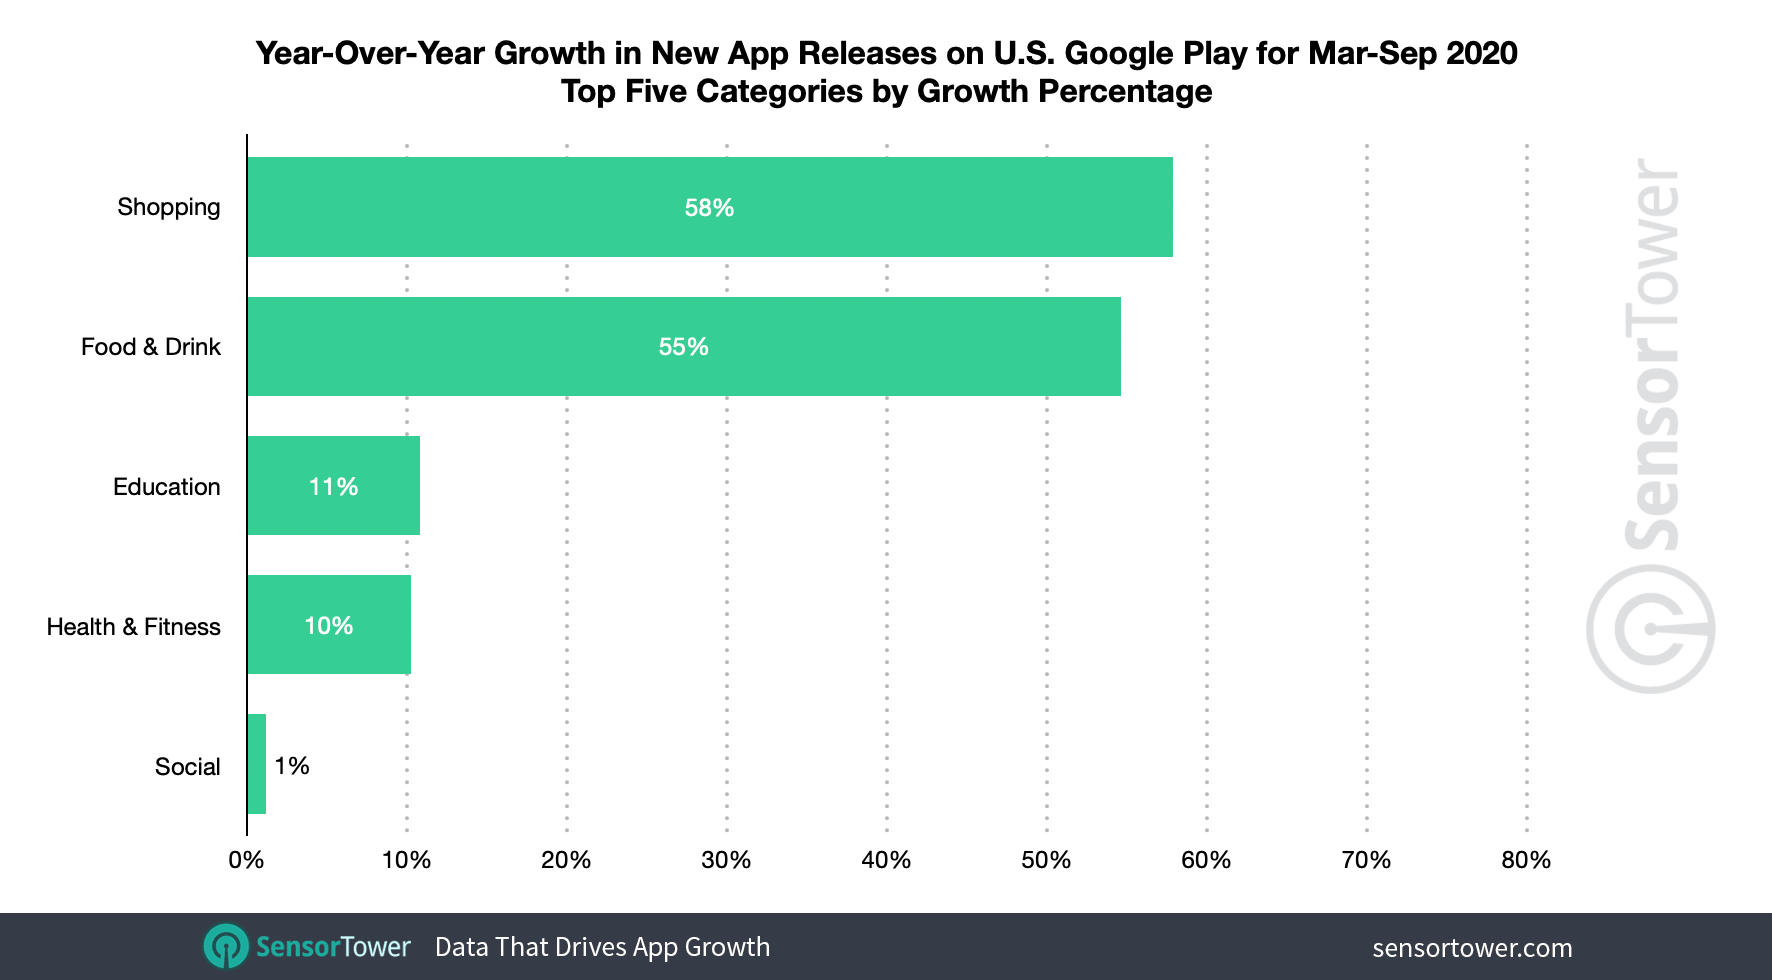 Category breakdown of new apps launched on U.S. Google Play